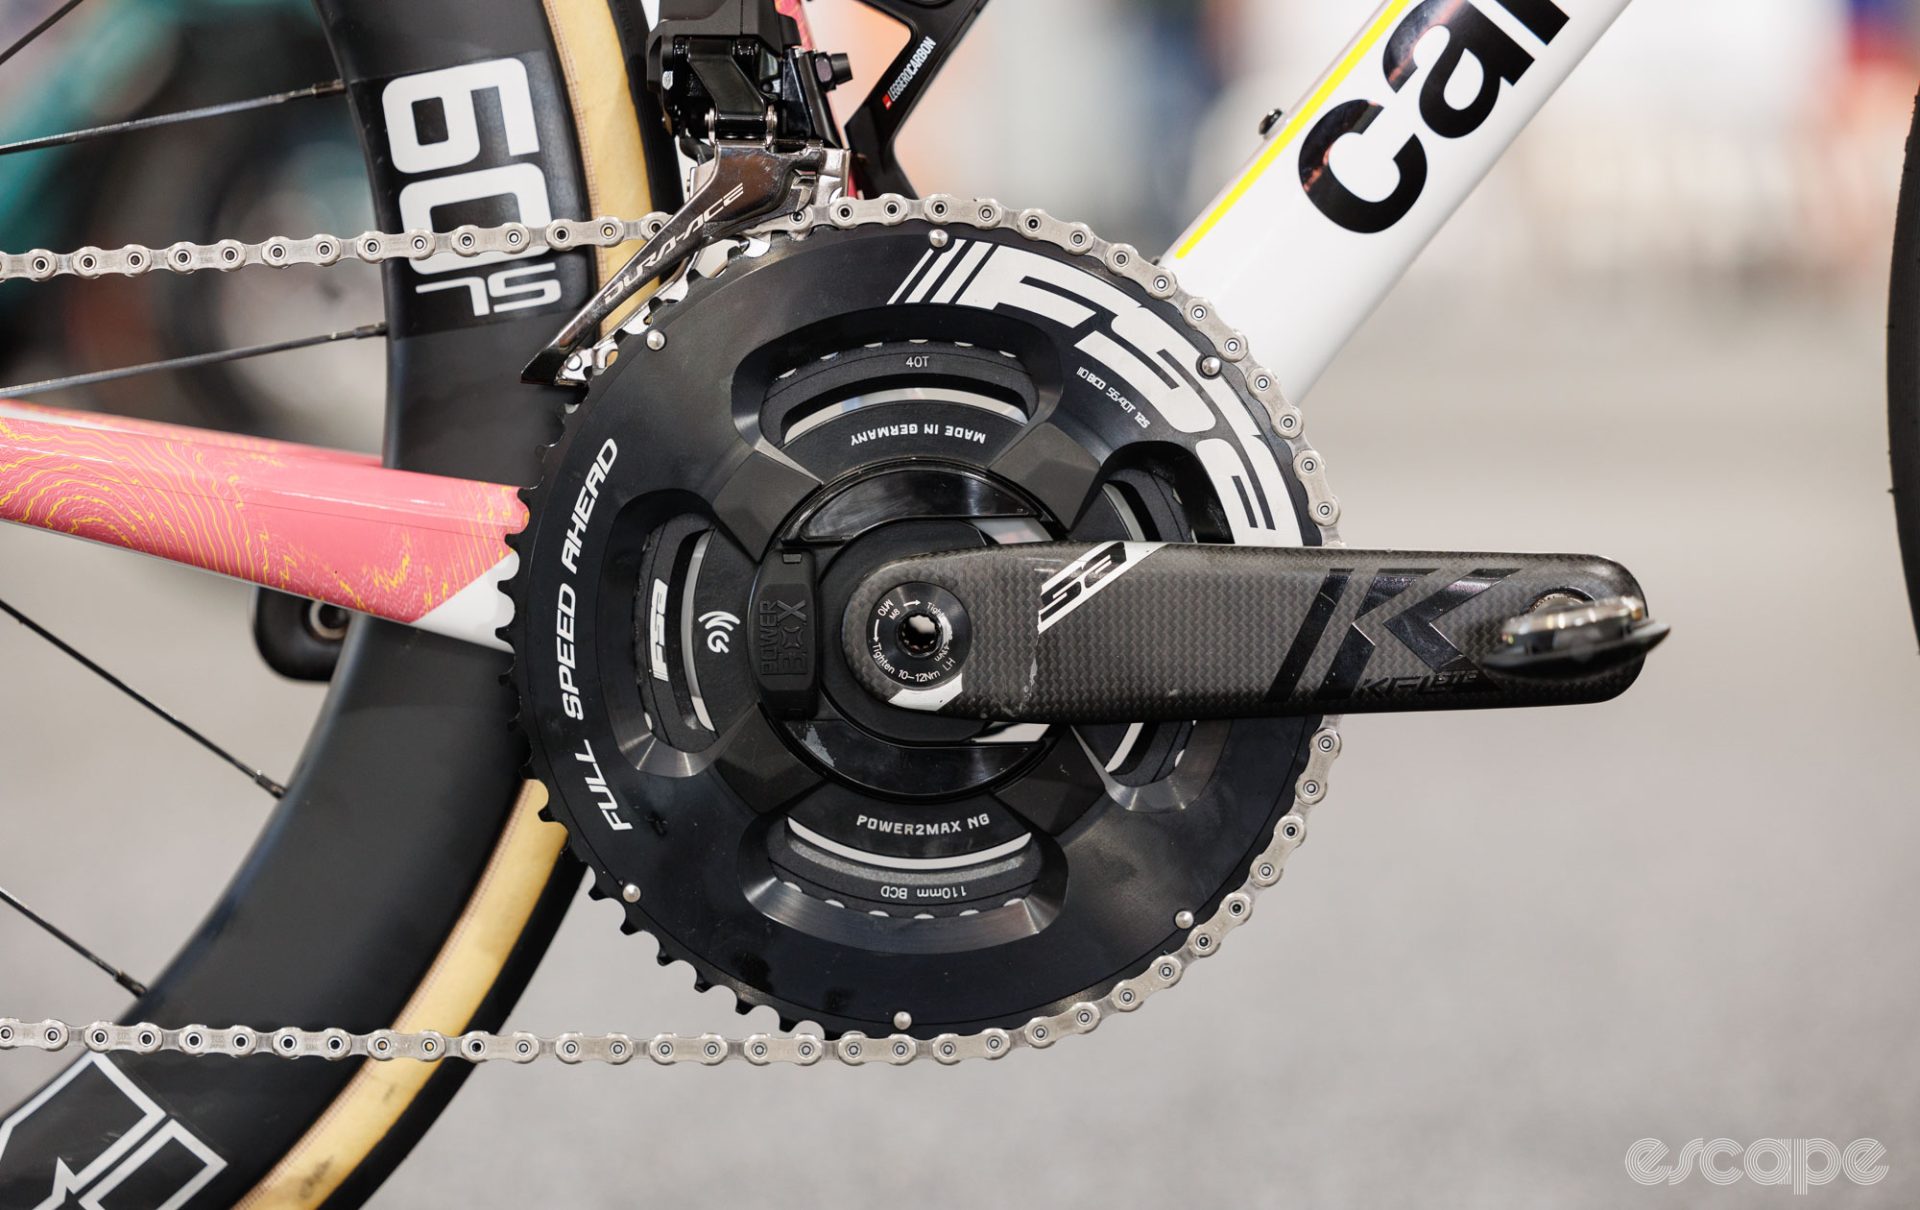 An FSA crankset with a Power2Max spider-based power meter.